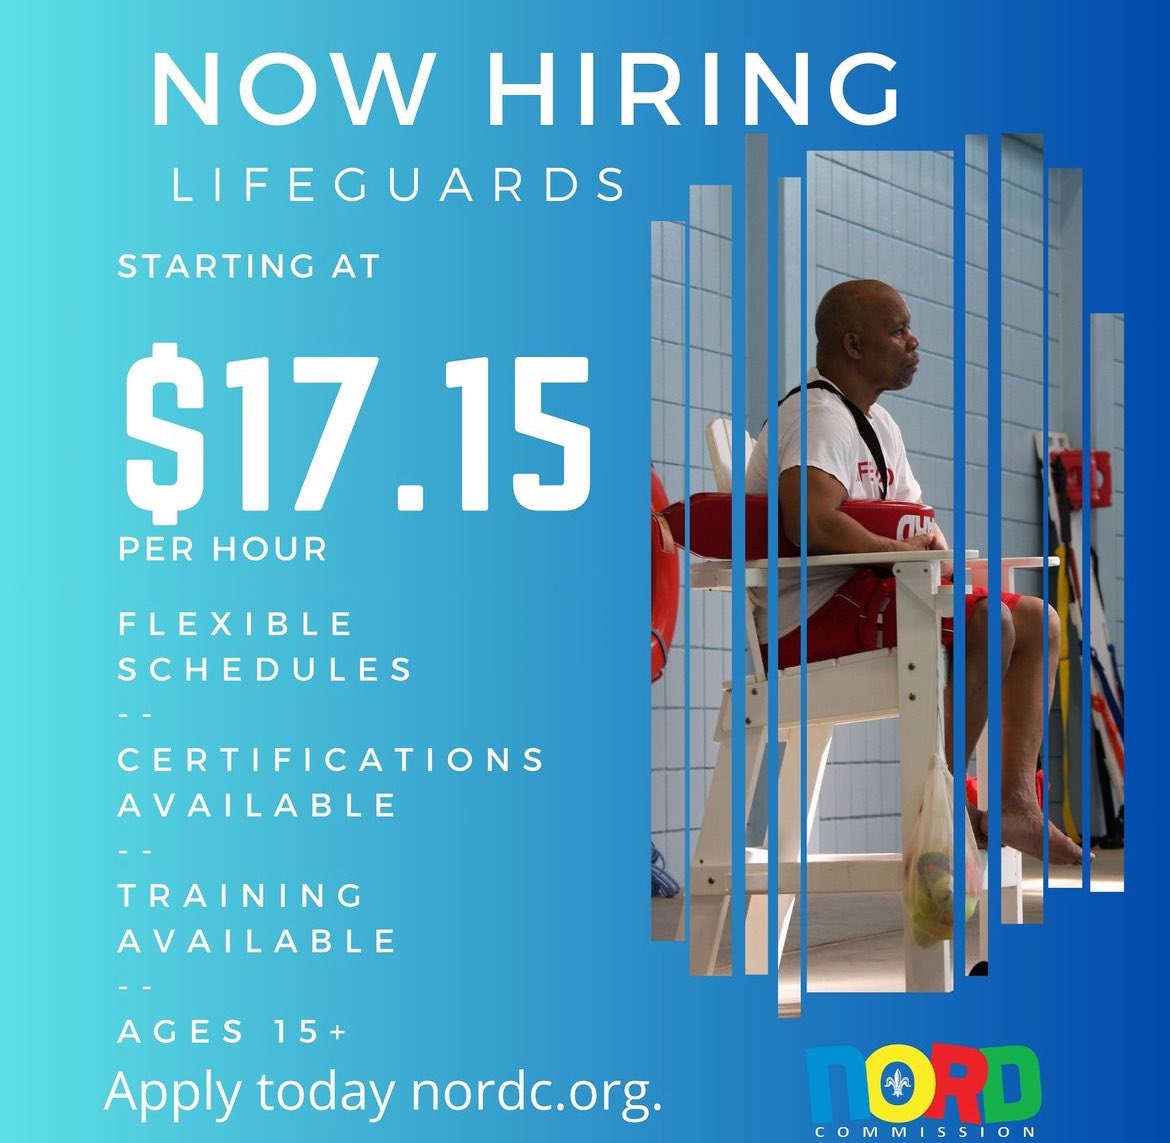 Dive into a rewarding career!🏊🏊‍♂️ @nordcommission is NOW HIRING Lifeguards starting at $17.15/hr with flexible schedules! Certifications and training available. Ages 15+ welcome. ➡️➡️Apply today at nordc.org! #NORDC #NowHiring #Lifeguards #CareerOpportunity